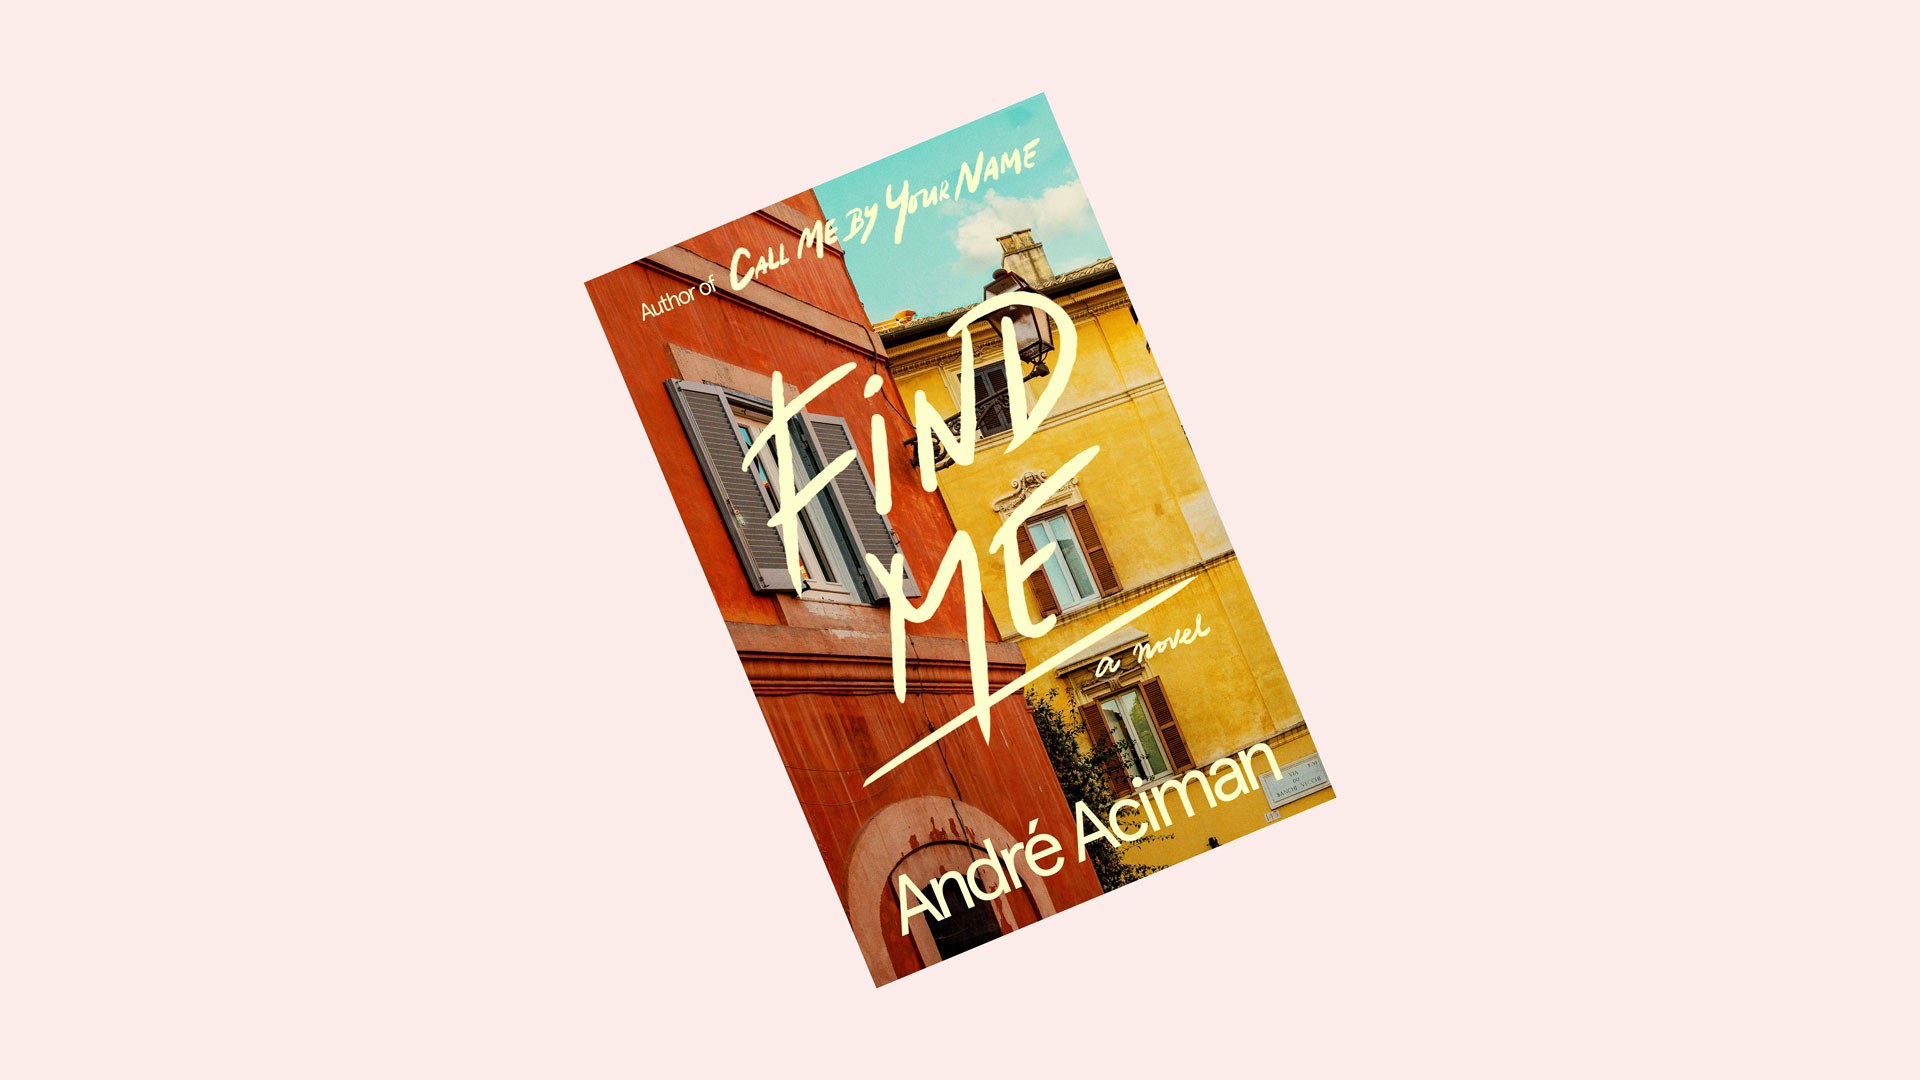 find me andre aciman book review